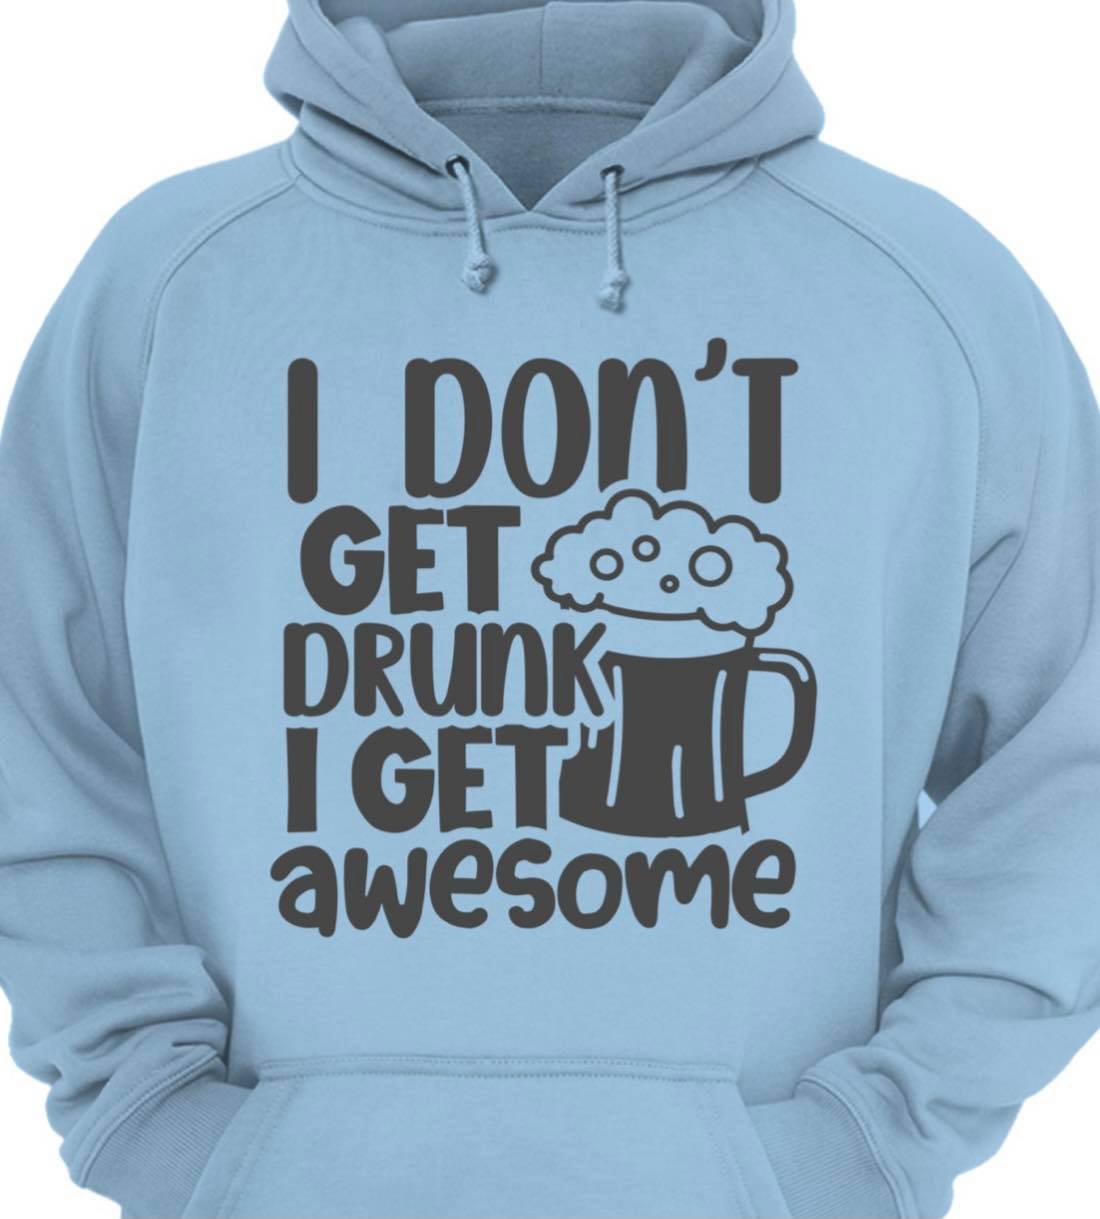 I don't get drunk I get awesome - Cup of beer